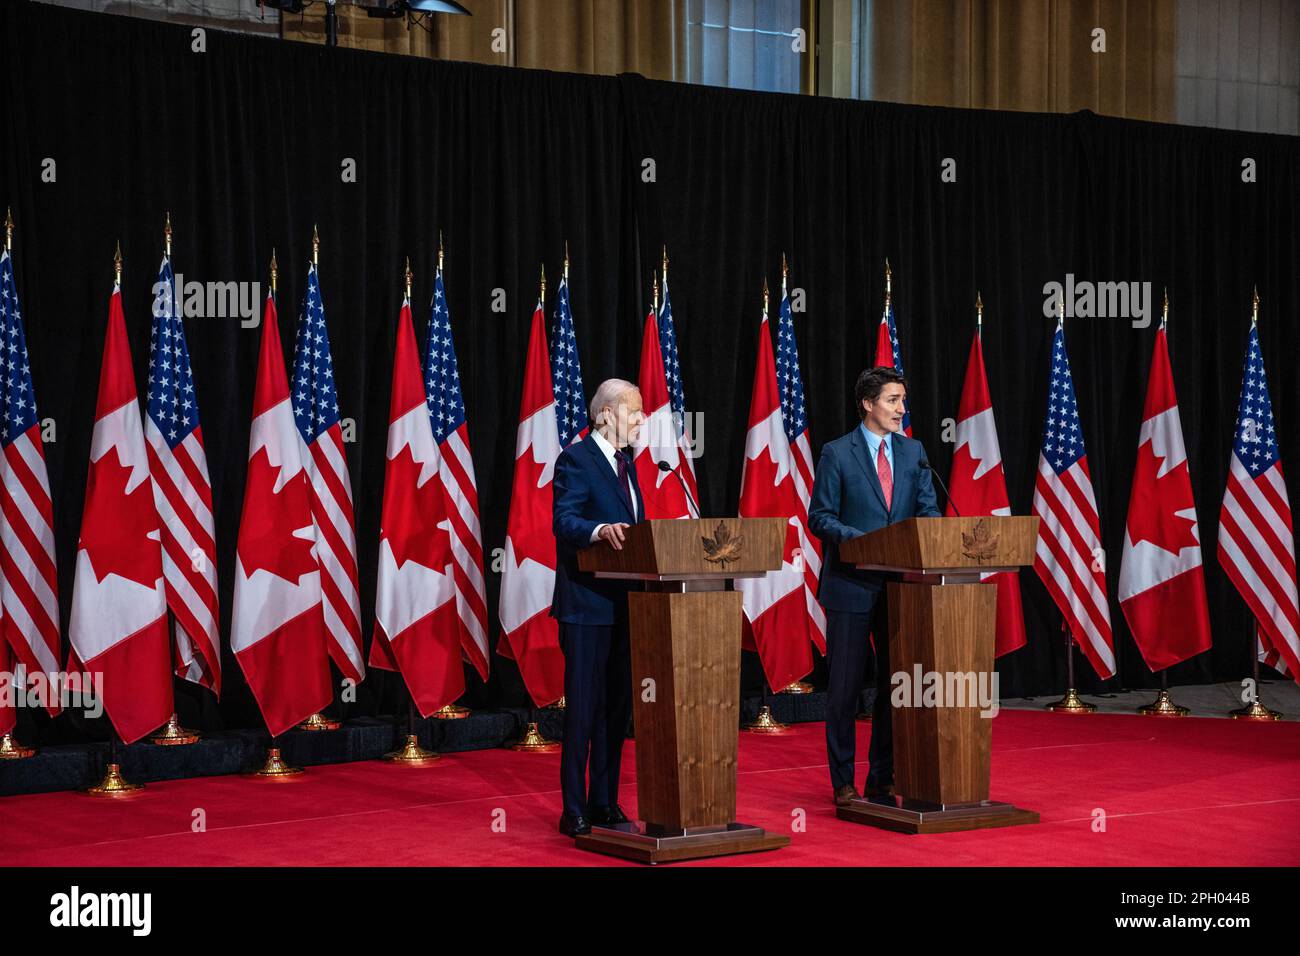 Ottawa, Canada. 24th Mar, 2023. U.S. President Joe Biden speaks during a joint press conference with Canadian Prime Minister Justin Trudeau at the Sir John A. Macdonald Building in Ottawa. This is the first official visit that the American president has made to Canada since becoming president. Though visits between elected presidents and the allied country typically take place sooner, Biden's inaugural visit to the northern neighbor was delayed due to COVID-19 travel restrictions. Credit: SOPA Images Limited/Alamy Live News Stock Photo